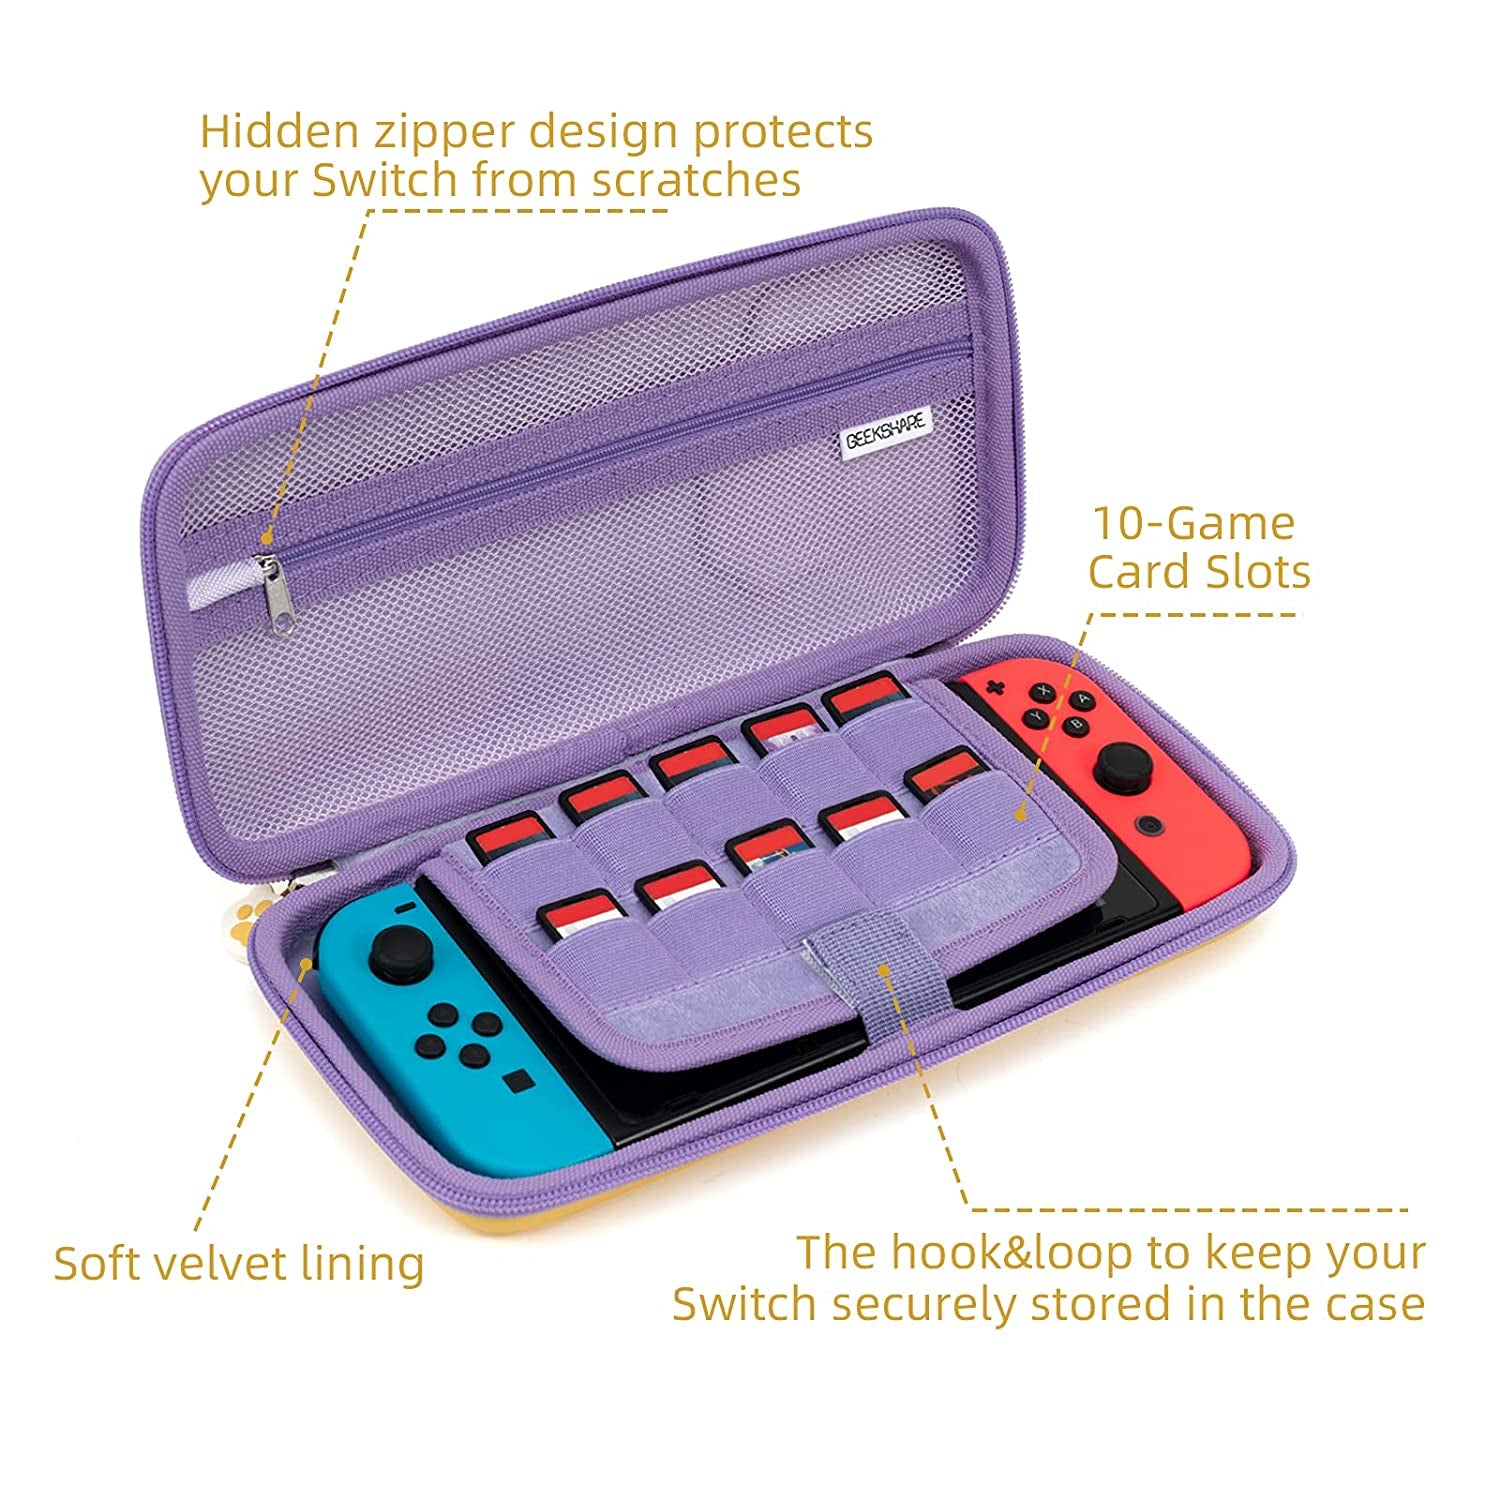 Cute Cat Paw Case Compatible with Nintendo Switch/Switch OLED - Portable Hardshell Slim Travel Carrying Case Fit Switch Console & Game Accessories - a Removable Wrist Strap (Pink Purple)